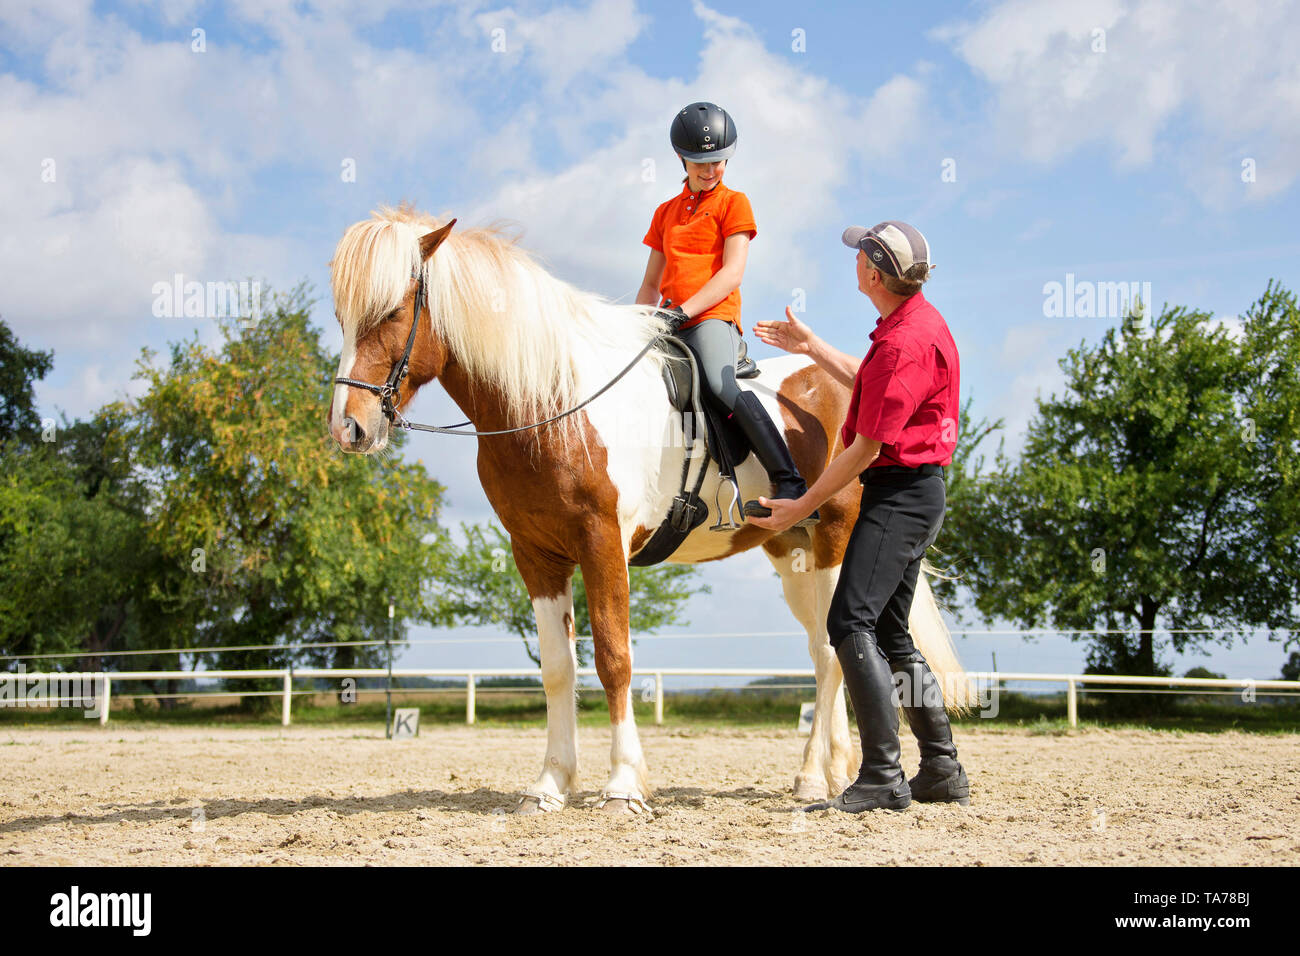 Icelandic Horse. A riding instructor gives a girl lessons. Austria Stock Photo